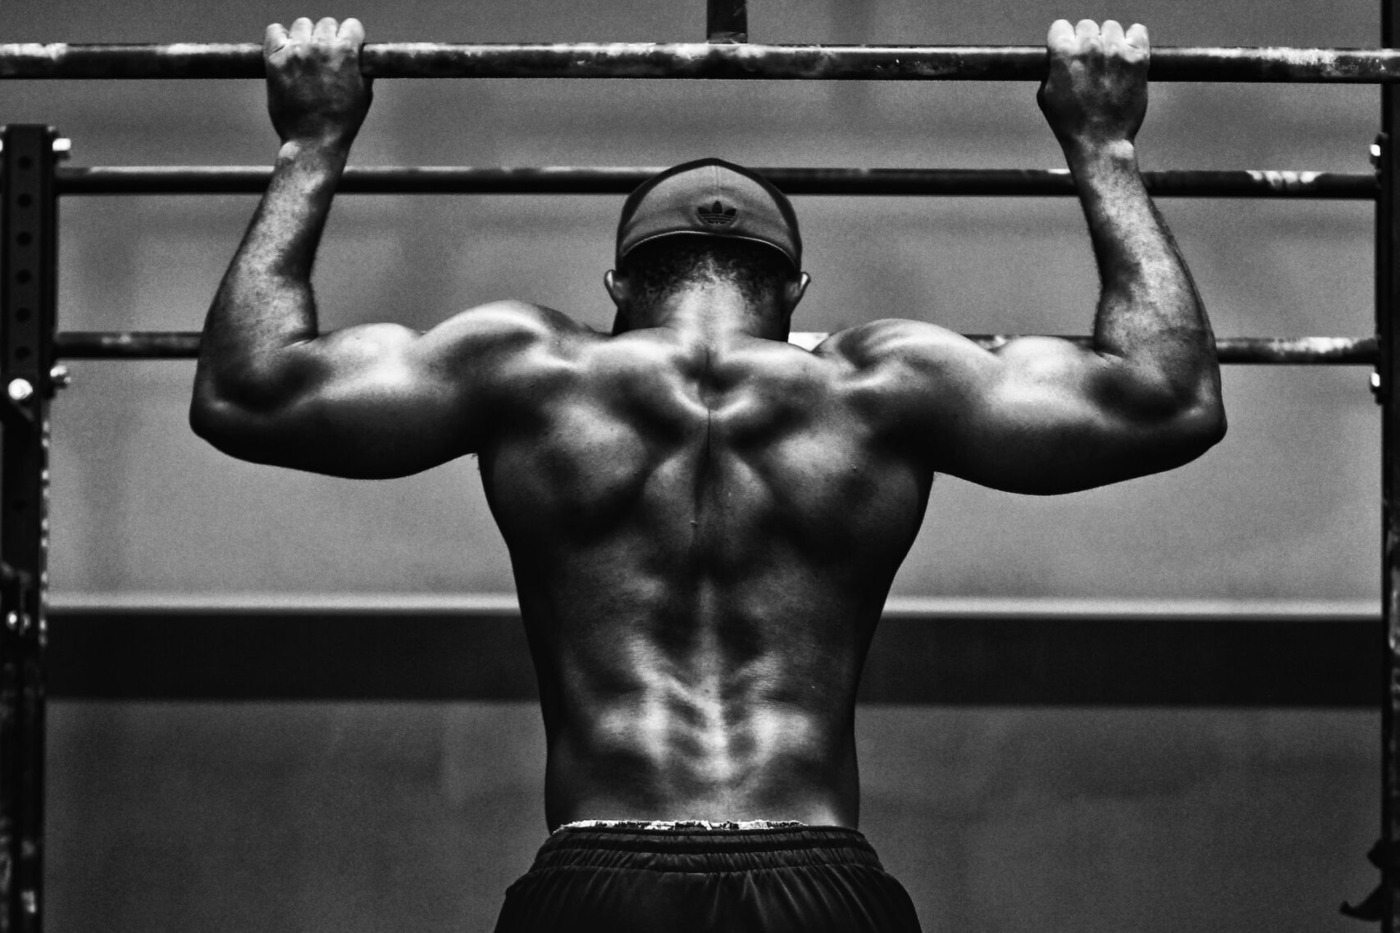 Rear view of a heavily muscled man doing pull ups